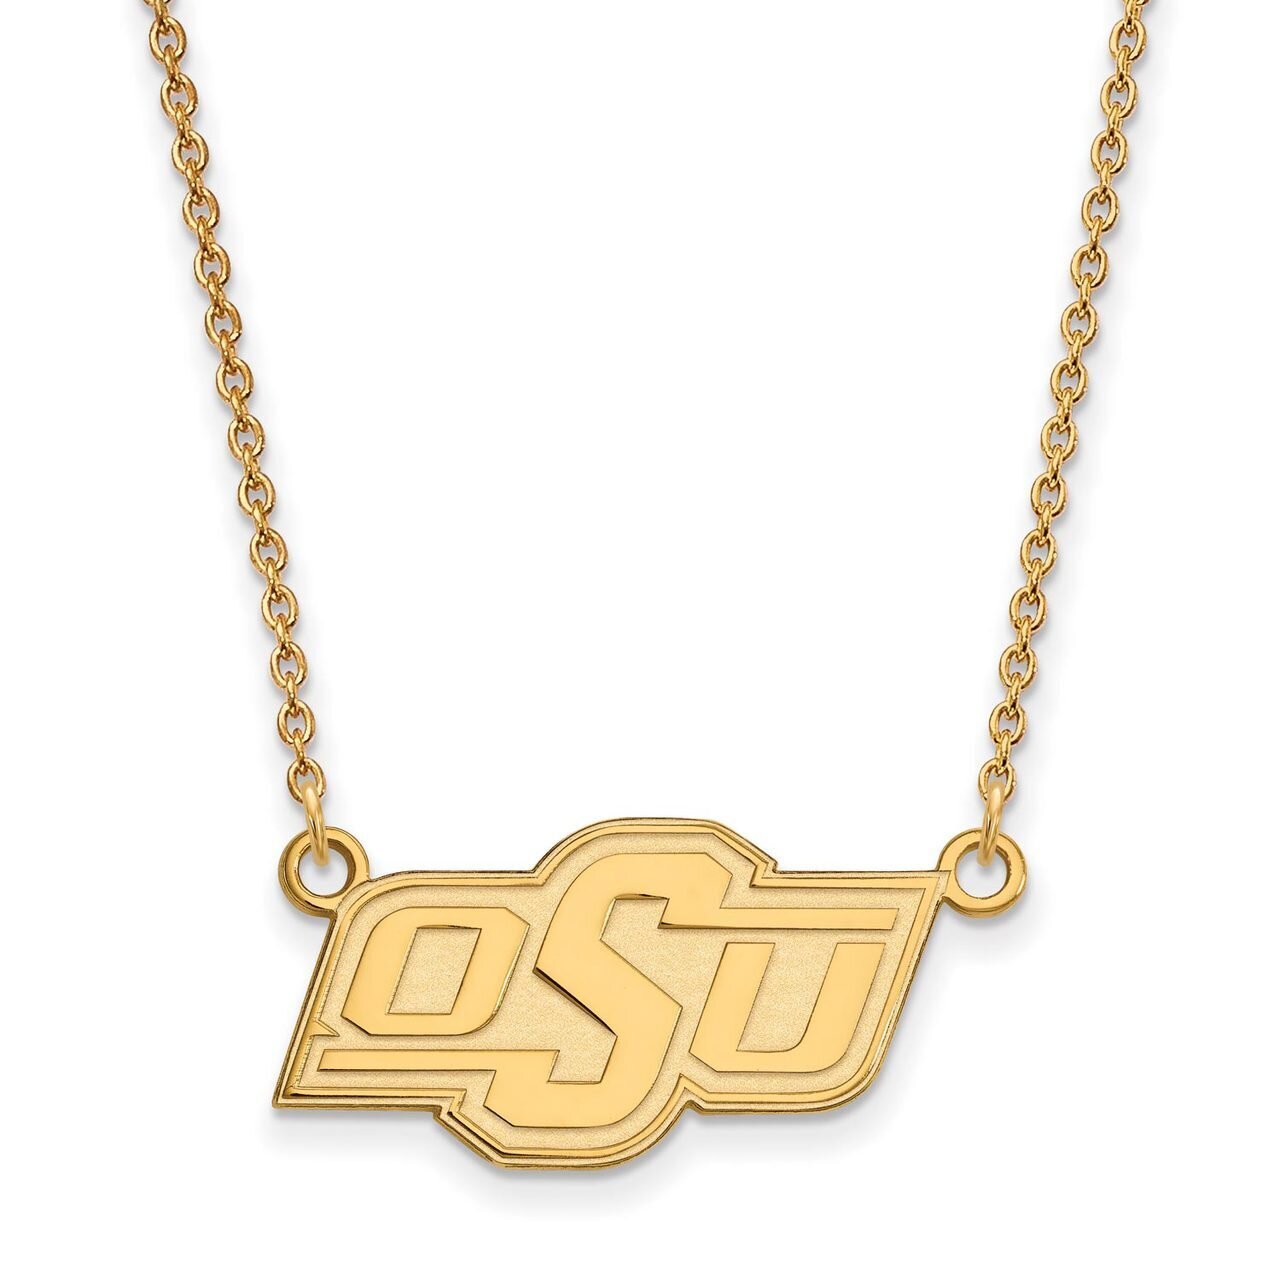 Oklahoma State University Small Pendant with Chain Necklace 14k Yellow Gold 4Y014OKS-18